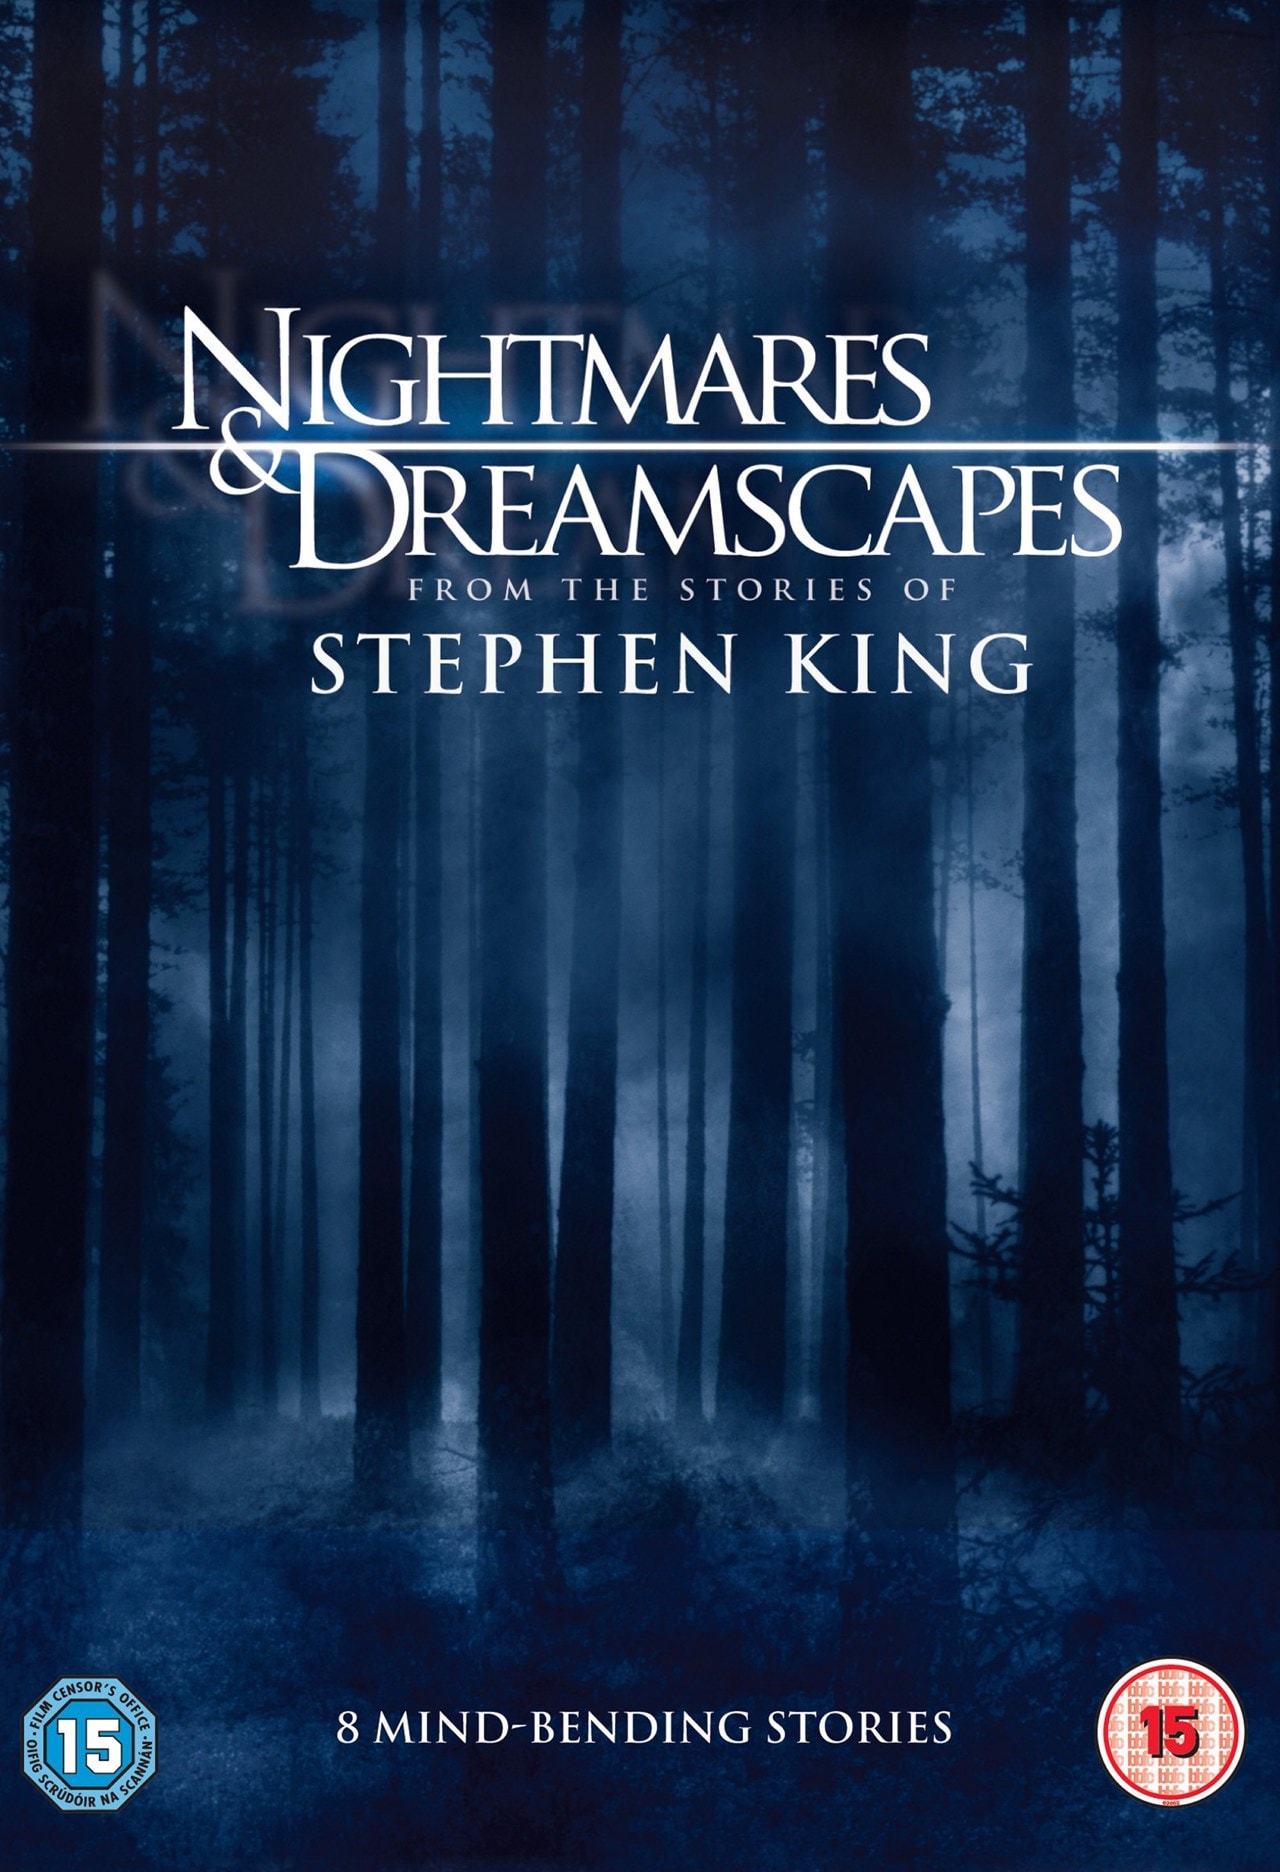 Nightmares & Dreamscapes: From the Stories of Stephen King (2006) S1 EP01&EP08 224Kbps 23.976Fps 48Khz 2.0Ch VCD Turkish Audio TAC